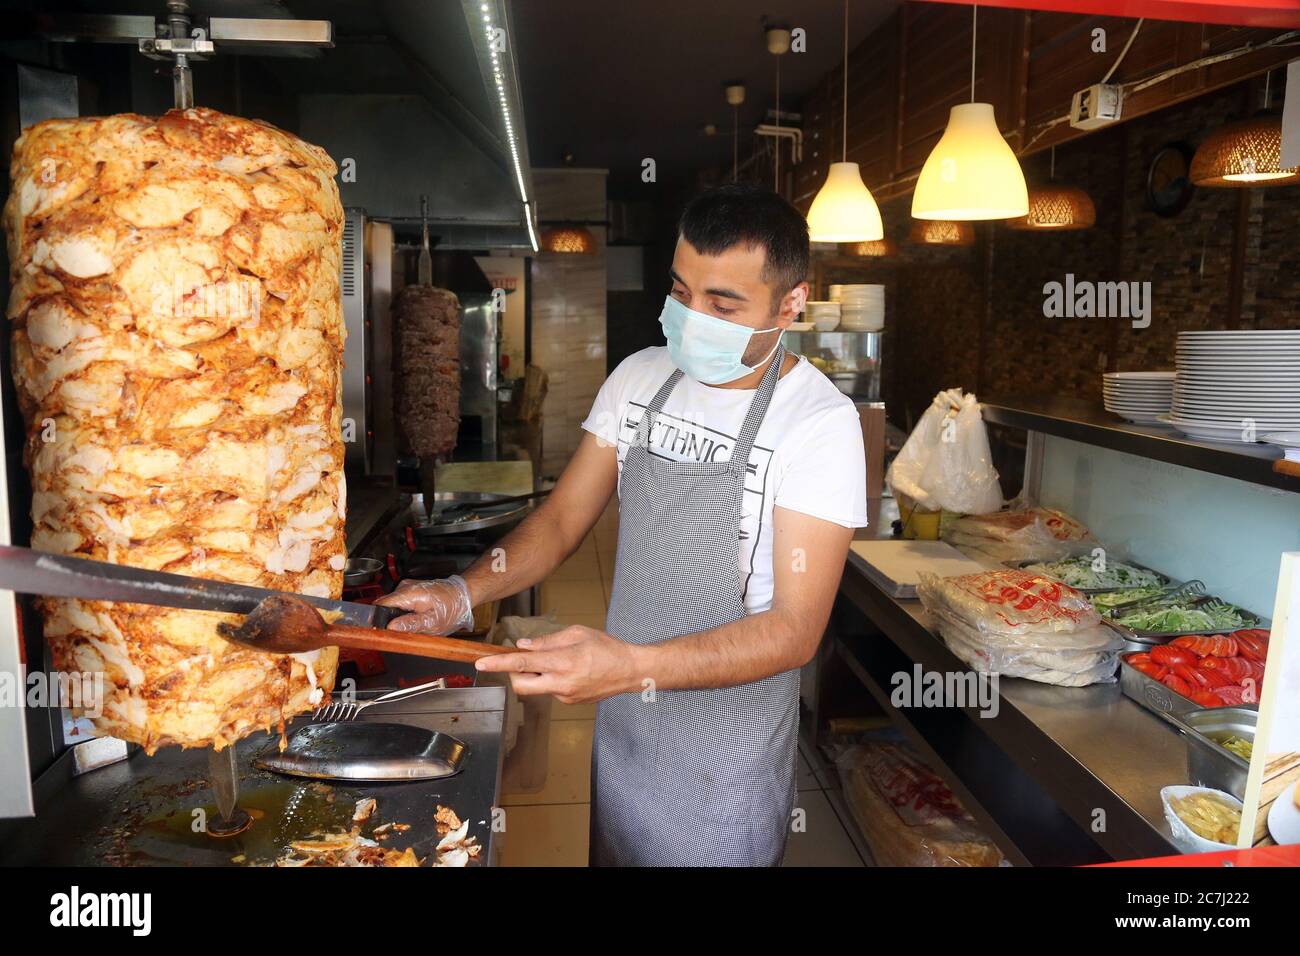 Ankara, Turkey. 17th July, 2020. A chef wearing a face mask prepares meal at a restaurant in Ankara, Turkey, on July 17, 2020. Turkish Health Minister Fahrettin Koca on Friday warned of the increasing number of intensive care and intubated COVID-19 patients in the country. Turkey's daily coronavirus cases increased by 926 on Friday, raising the overall number to 217,799, the minister said. Credit: Mustafa Kaya/Xinhua/Alamy Live News Stock Photo